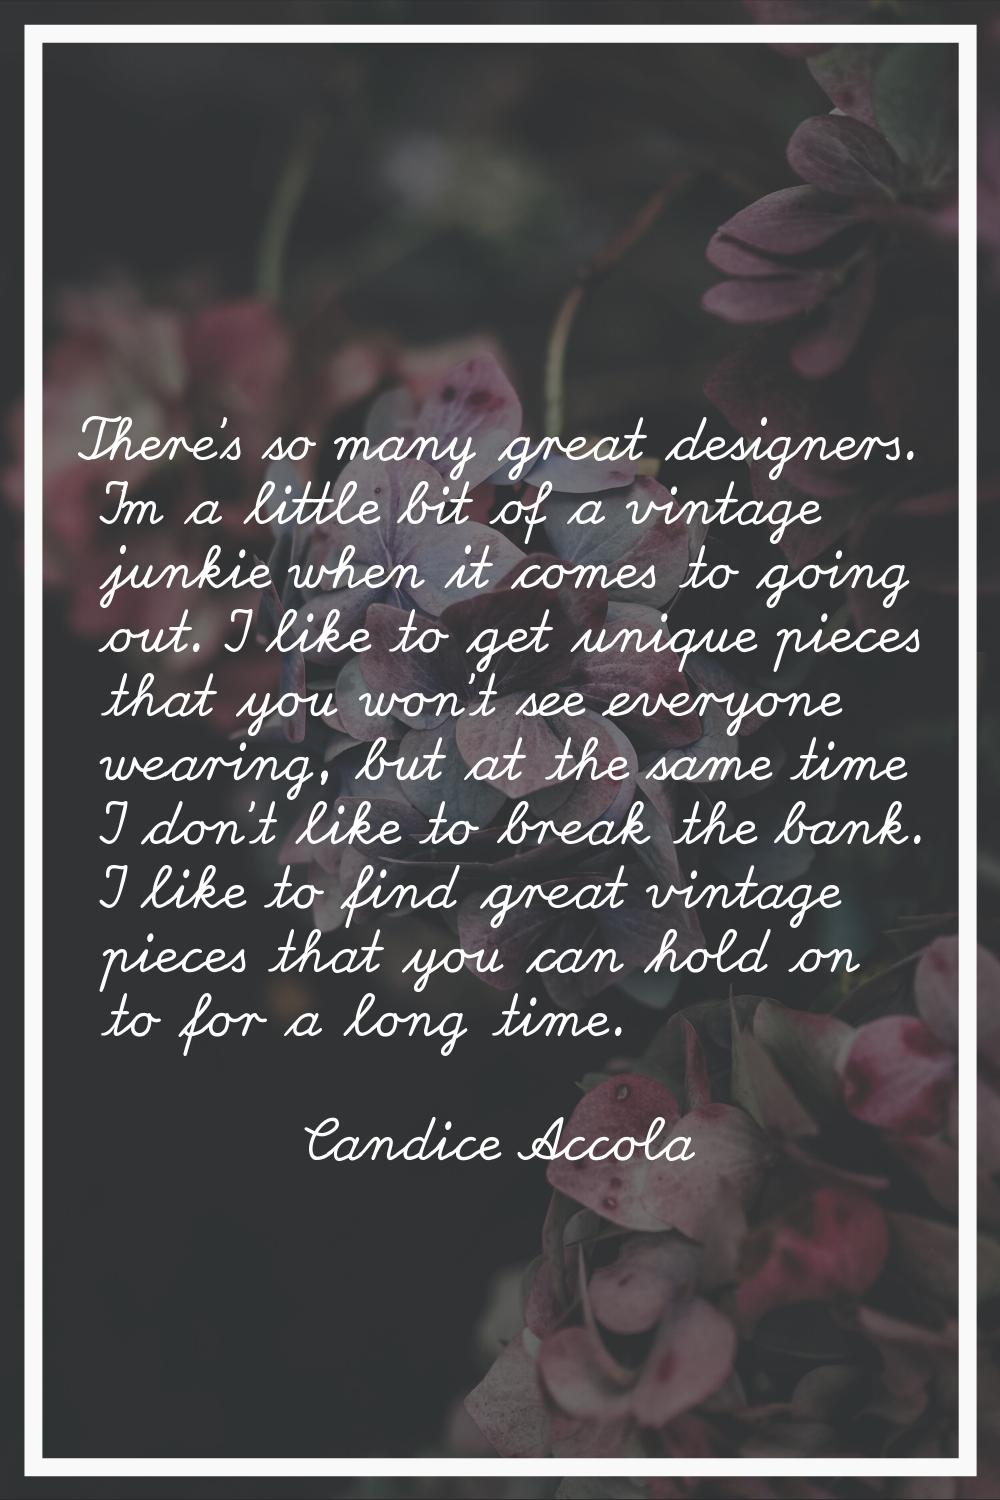 There's so many great designers. I'm a little bit of a vintage junkie when it comes to going out. I